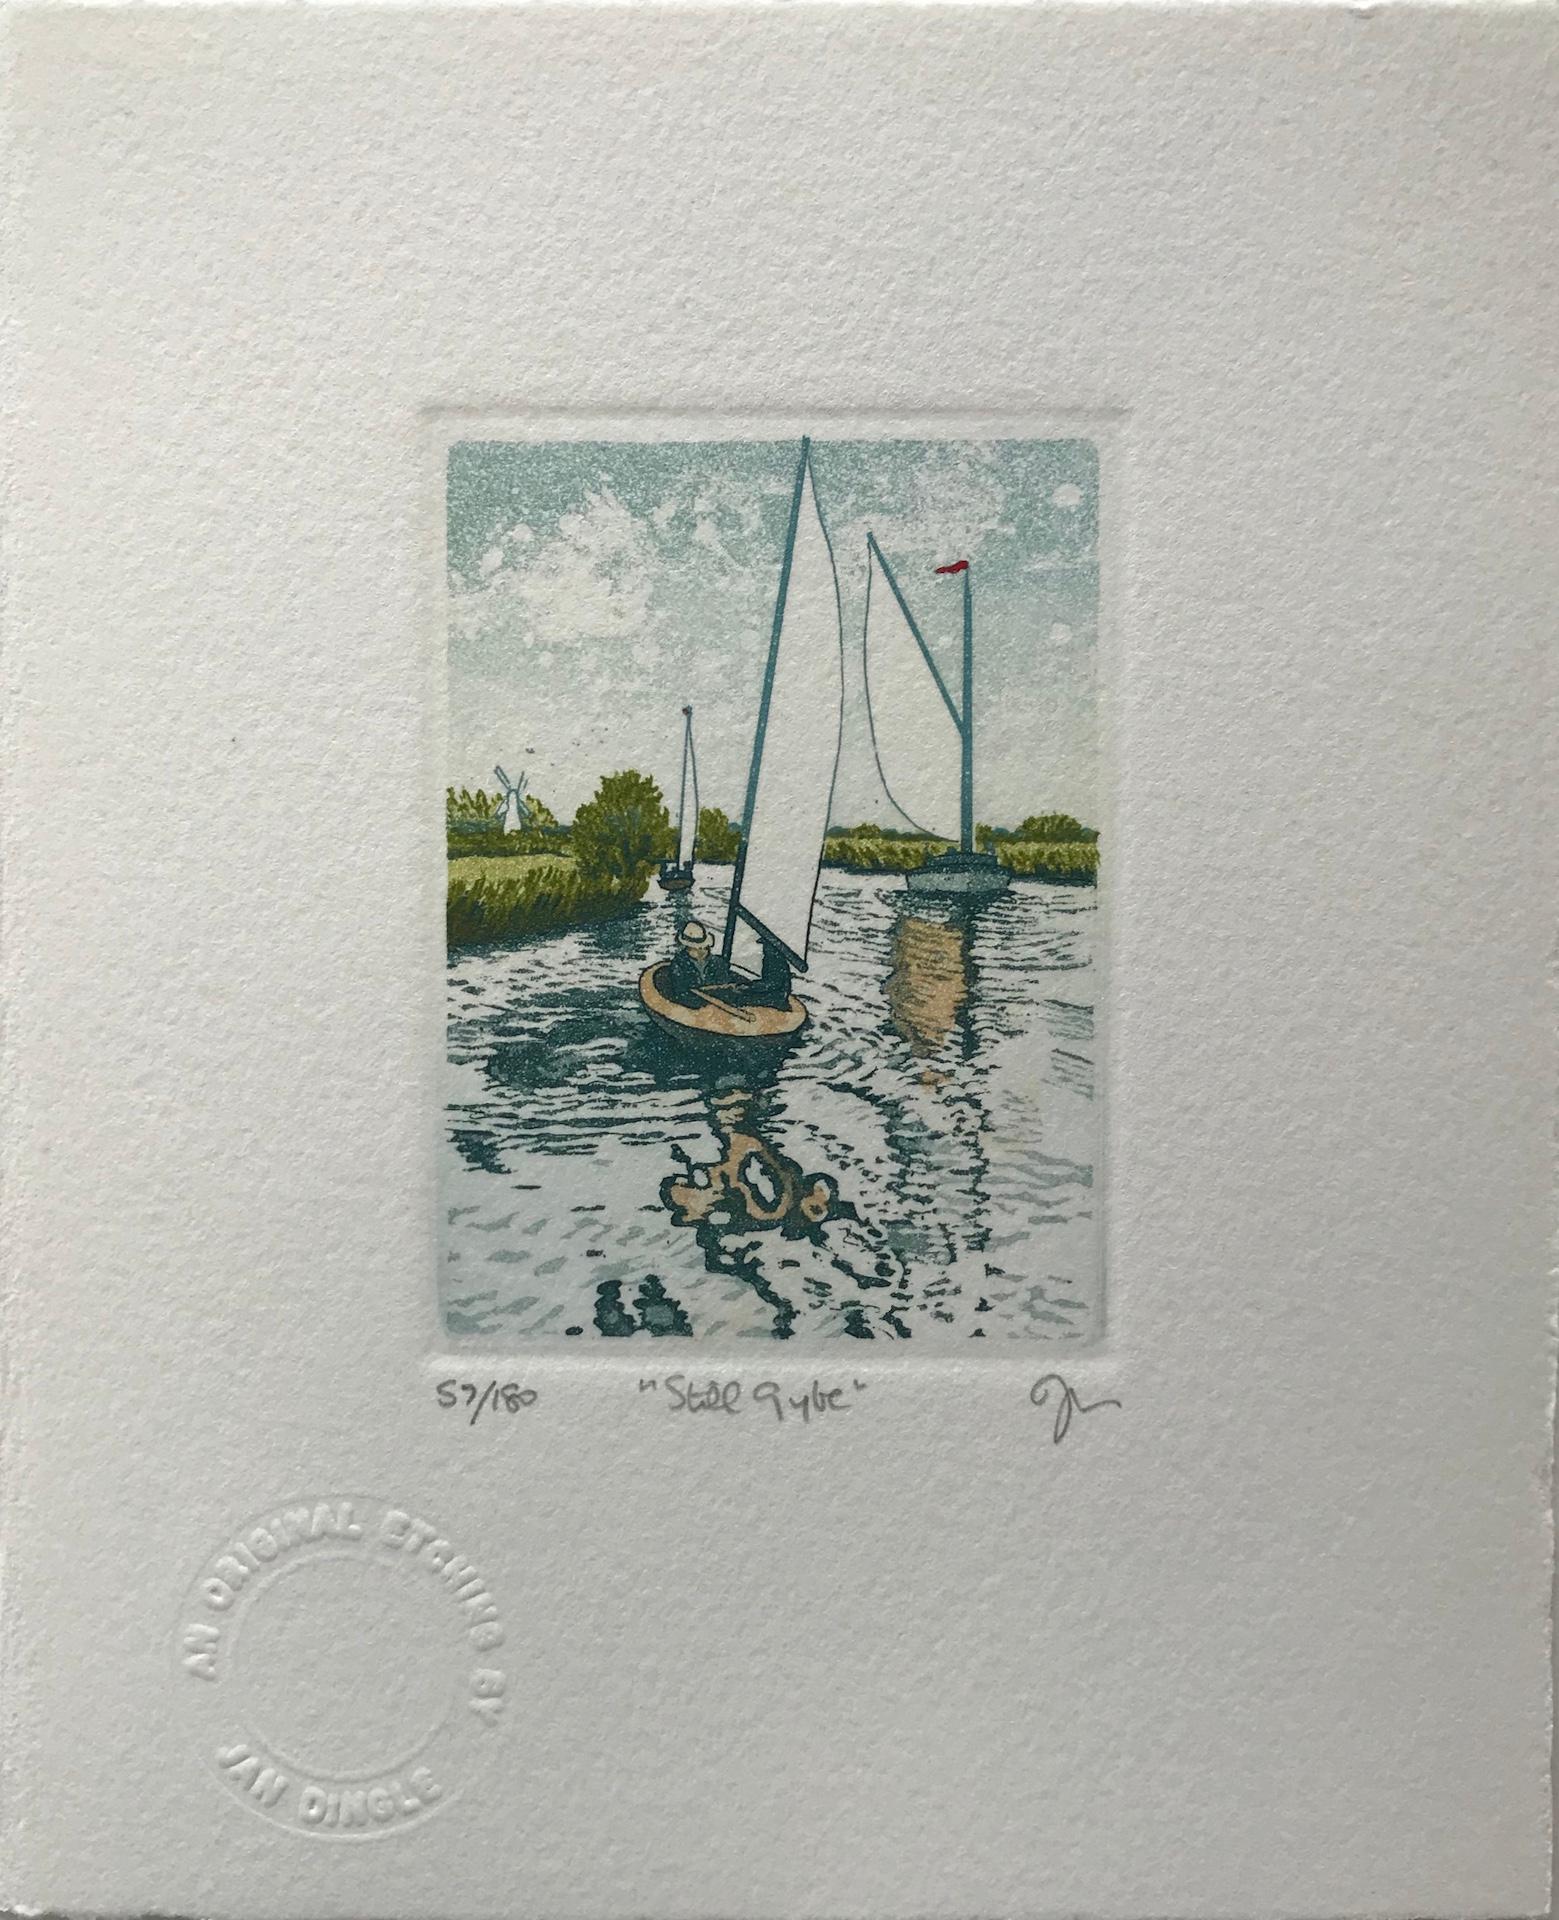 Jan Dingle
Still Gybe
Limited Edition Etching Print
Edition of 180
Image Size: H 8.5cm x W 6.5cm
Sheet Size: H 18.5cm x W 15.5cm
Signed and Numbered
Sold Unframed
Please note that any insitu images are purely an indication of how a piece may